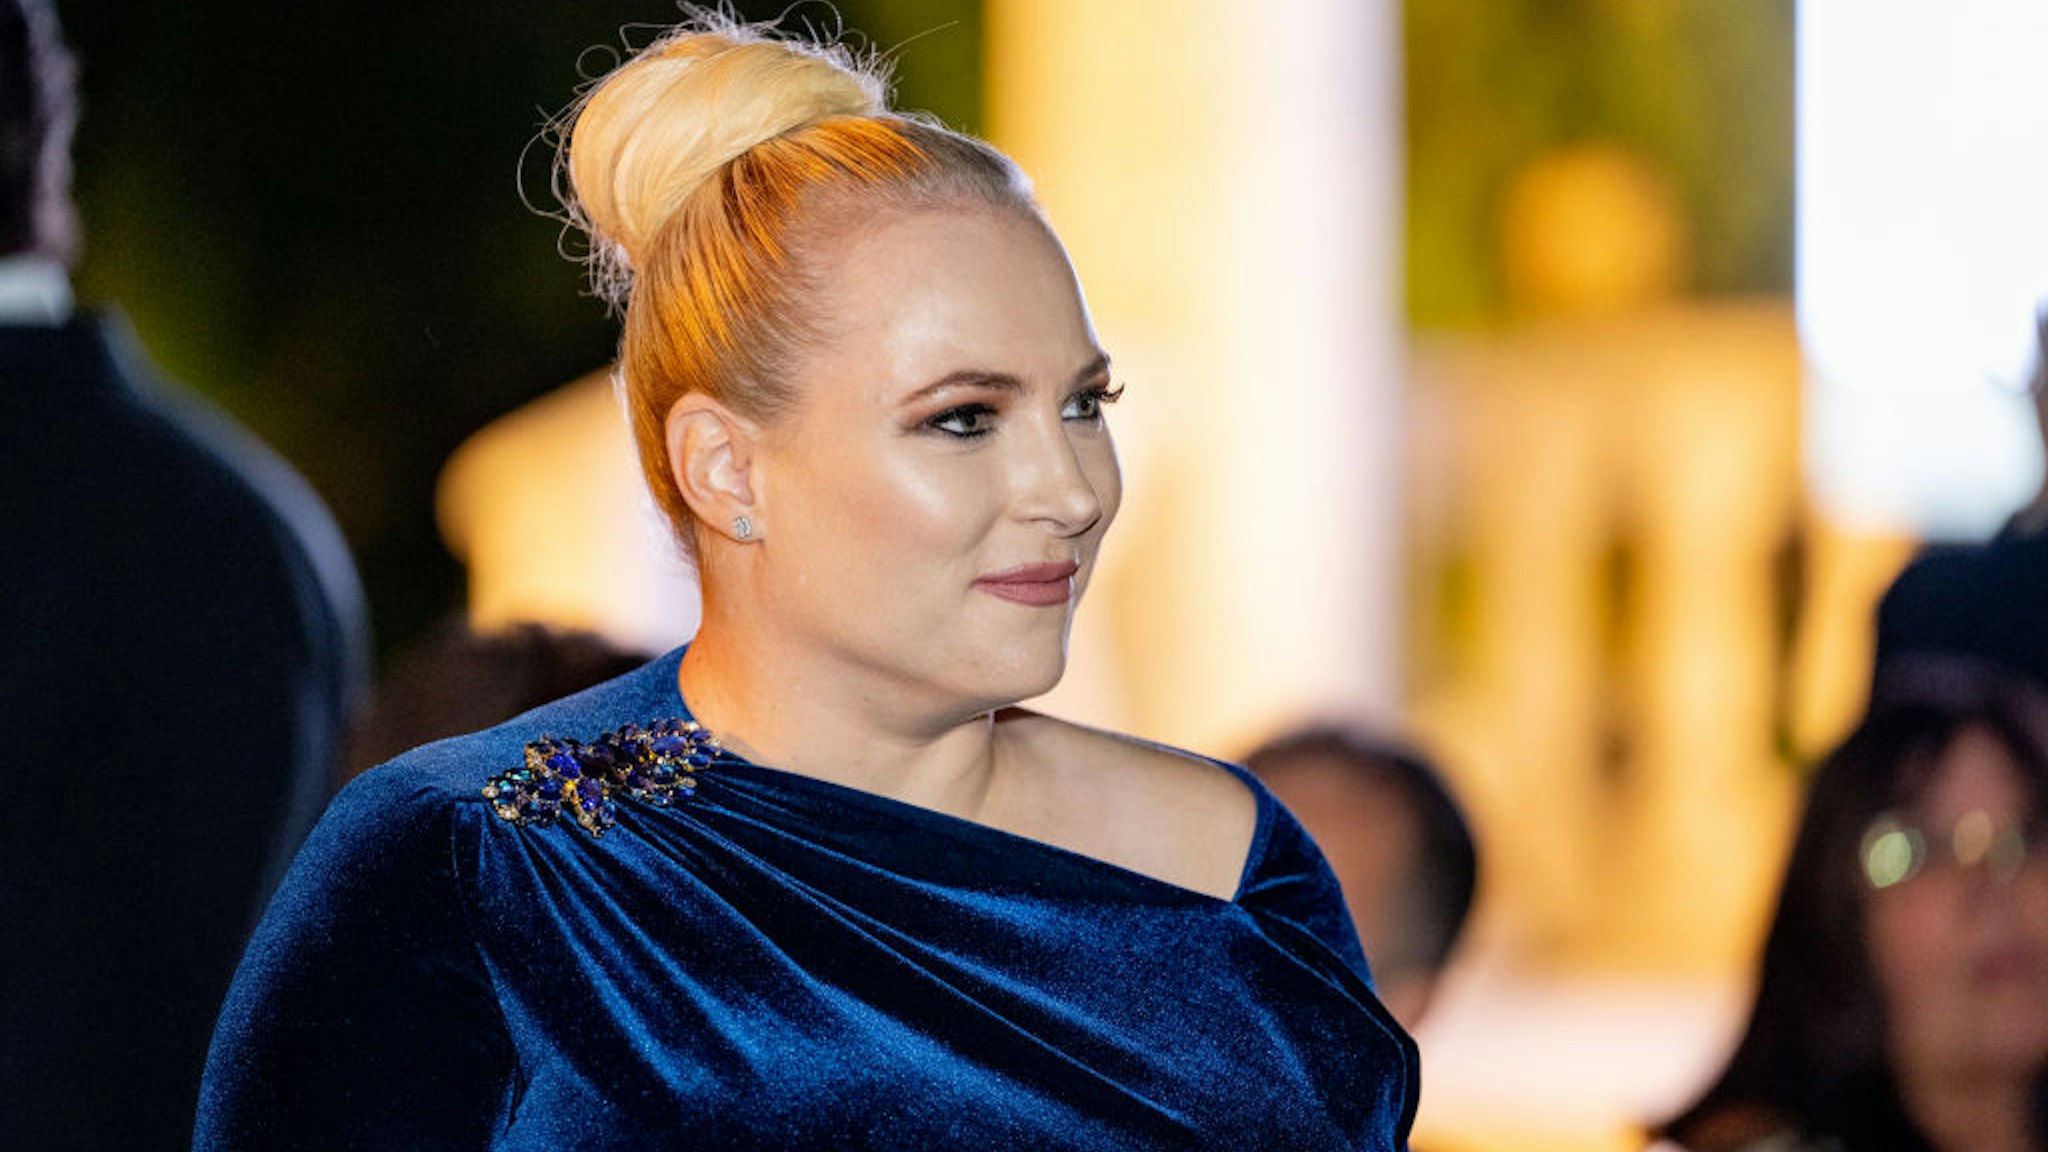 Lincoln Project co-founder Steve Schmidt called Meghan McCain "rotten" and said her father got too close to Russian operatives in his 2008 campaign for the GOP presidential nomination